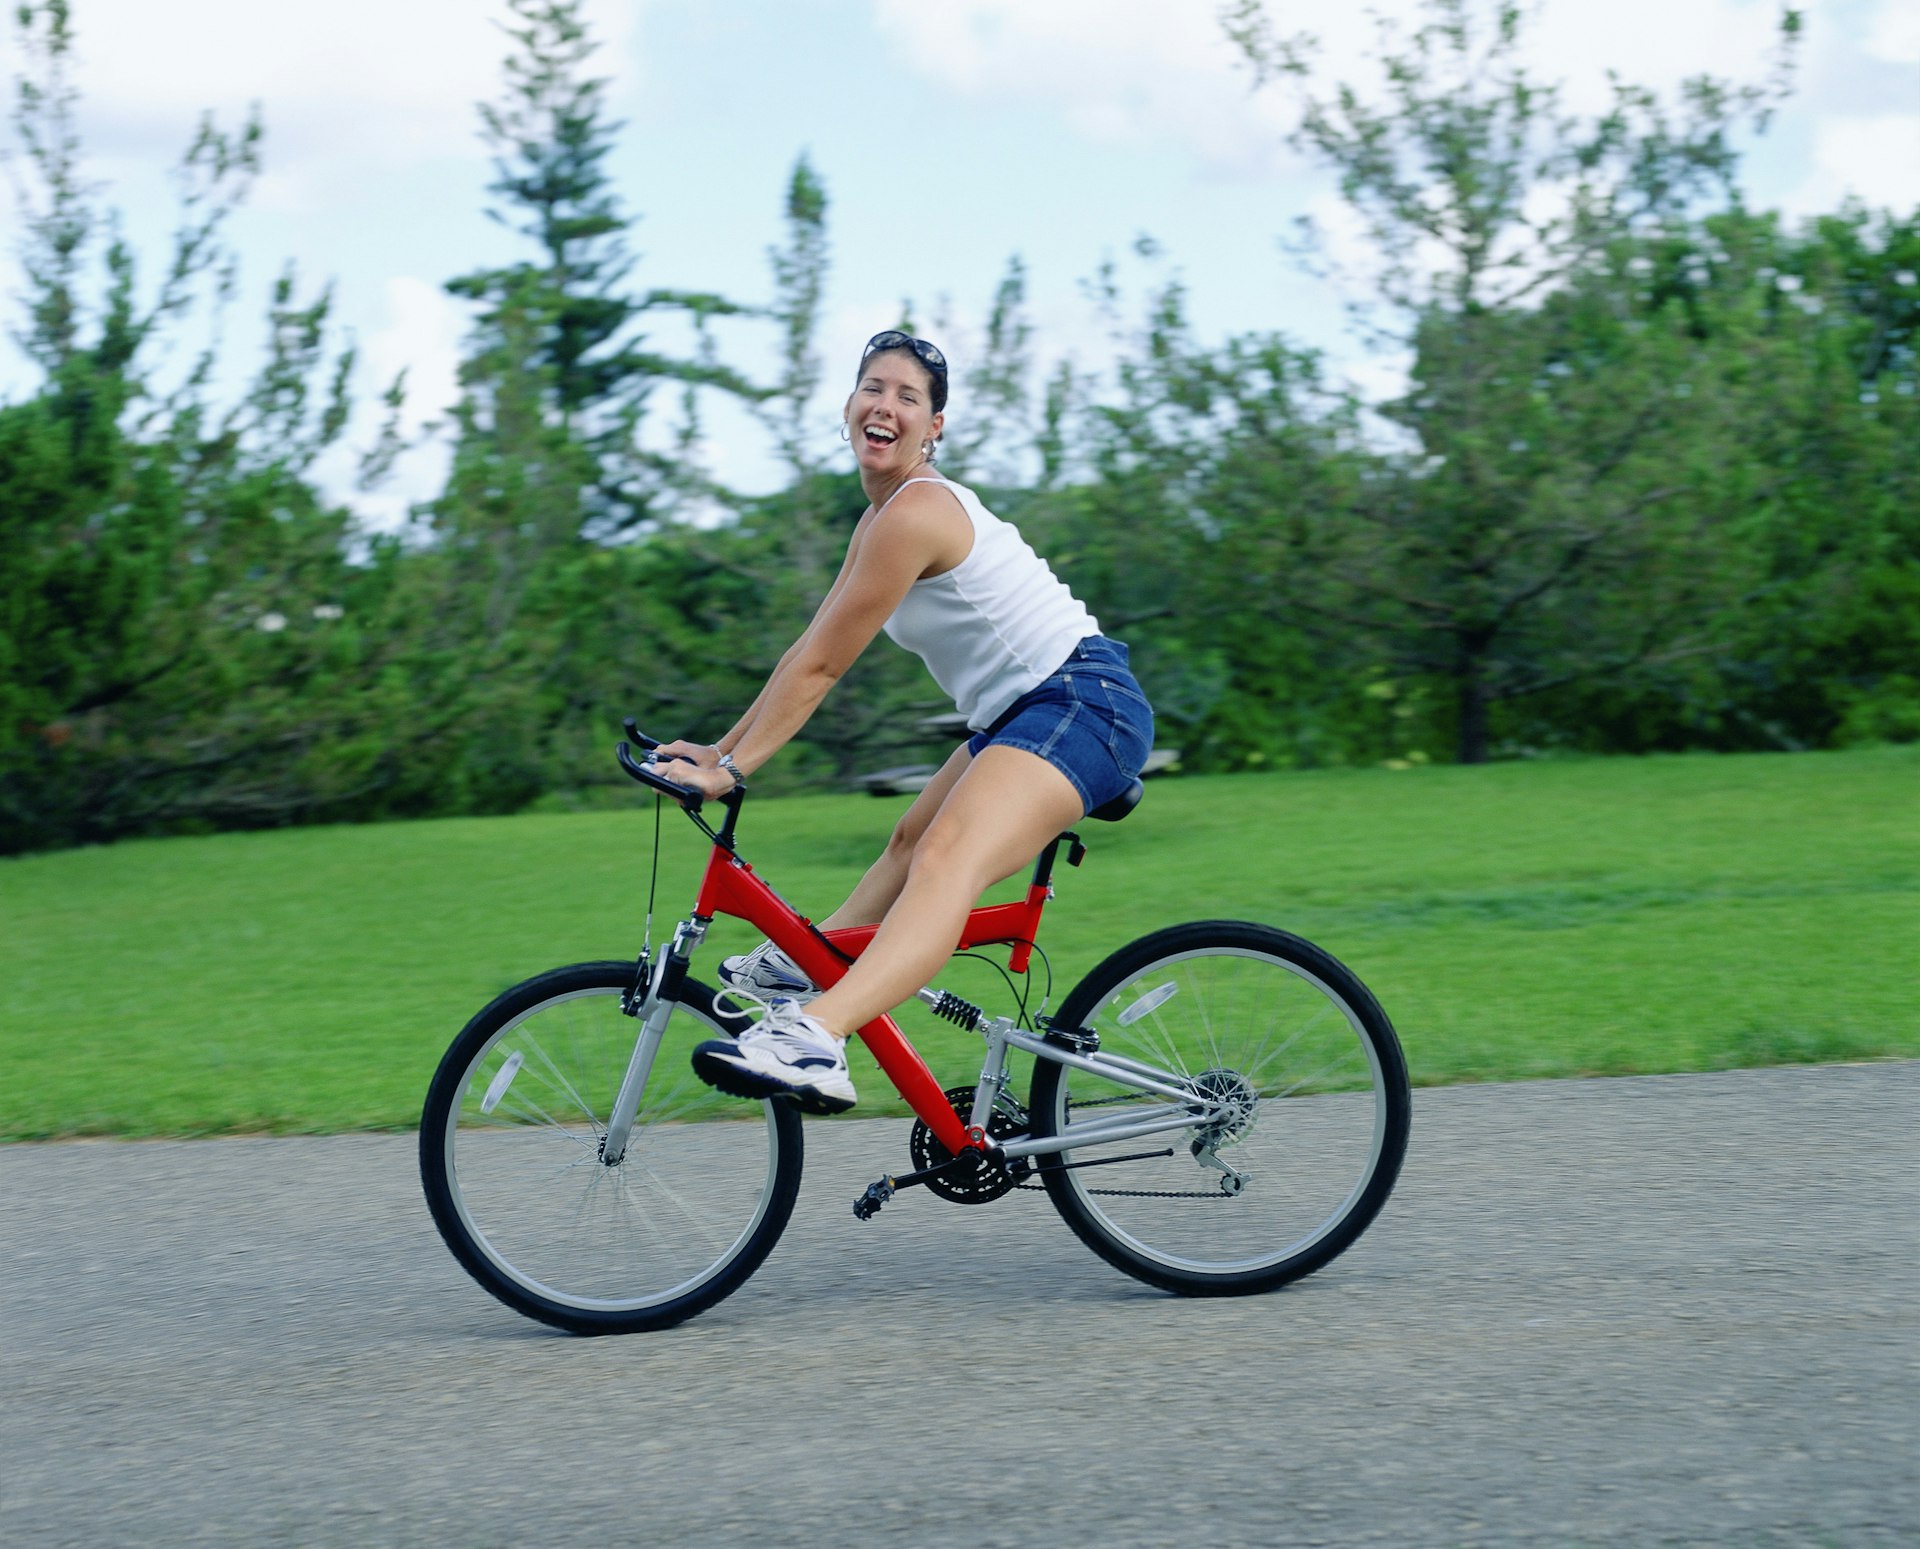 A young woman sticks both legs out and smiles at the camera as she rides a bike.